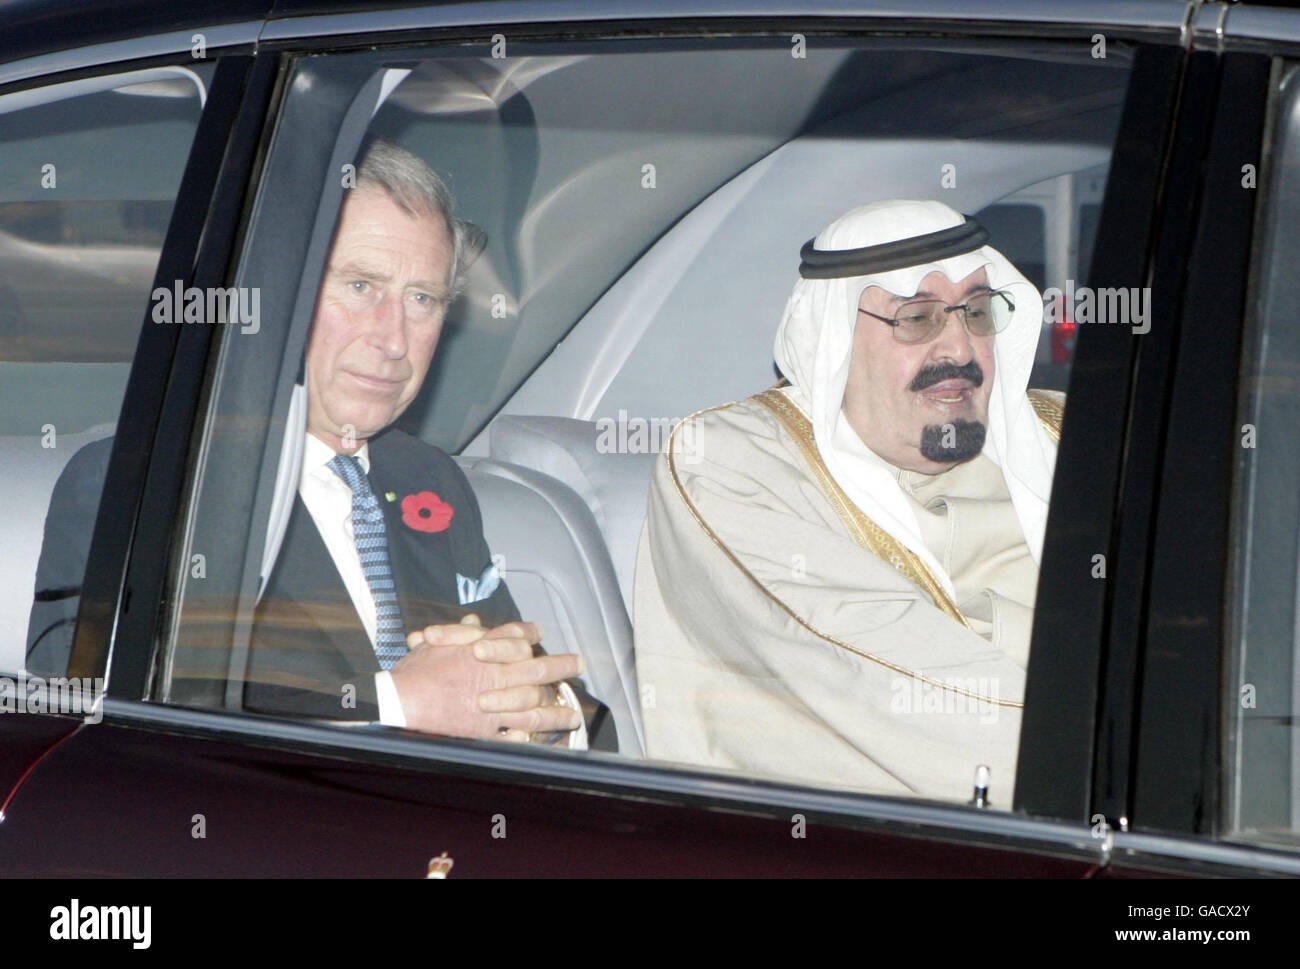 King Abdullah of Saudi Arabia (right) and The Prince of Wales drive from Heathrow airport after the arrival of the King for a state visit. Stock Photo